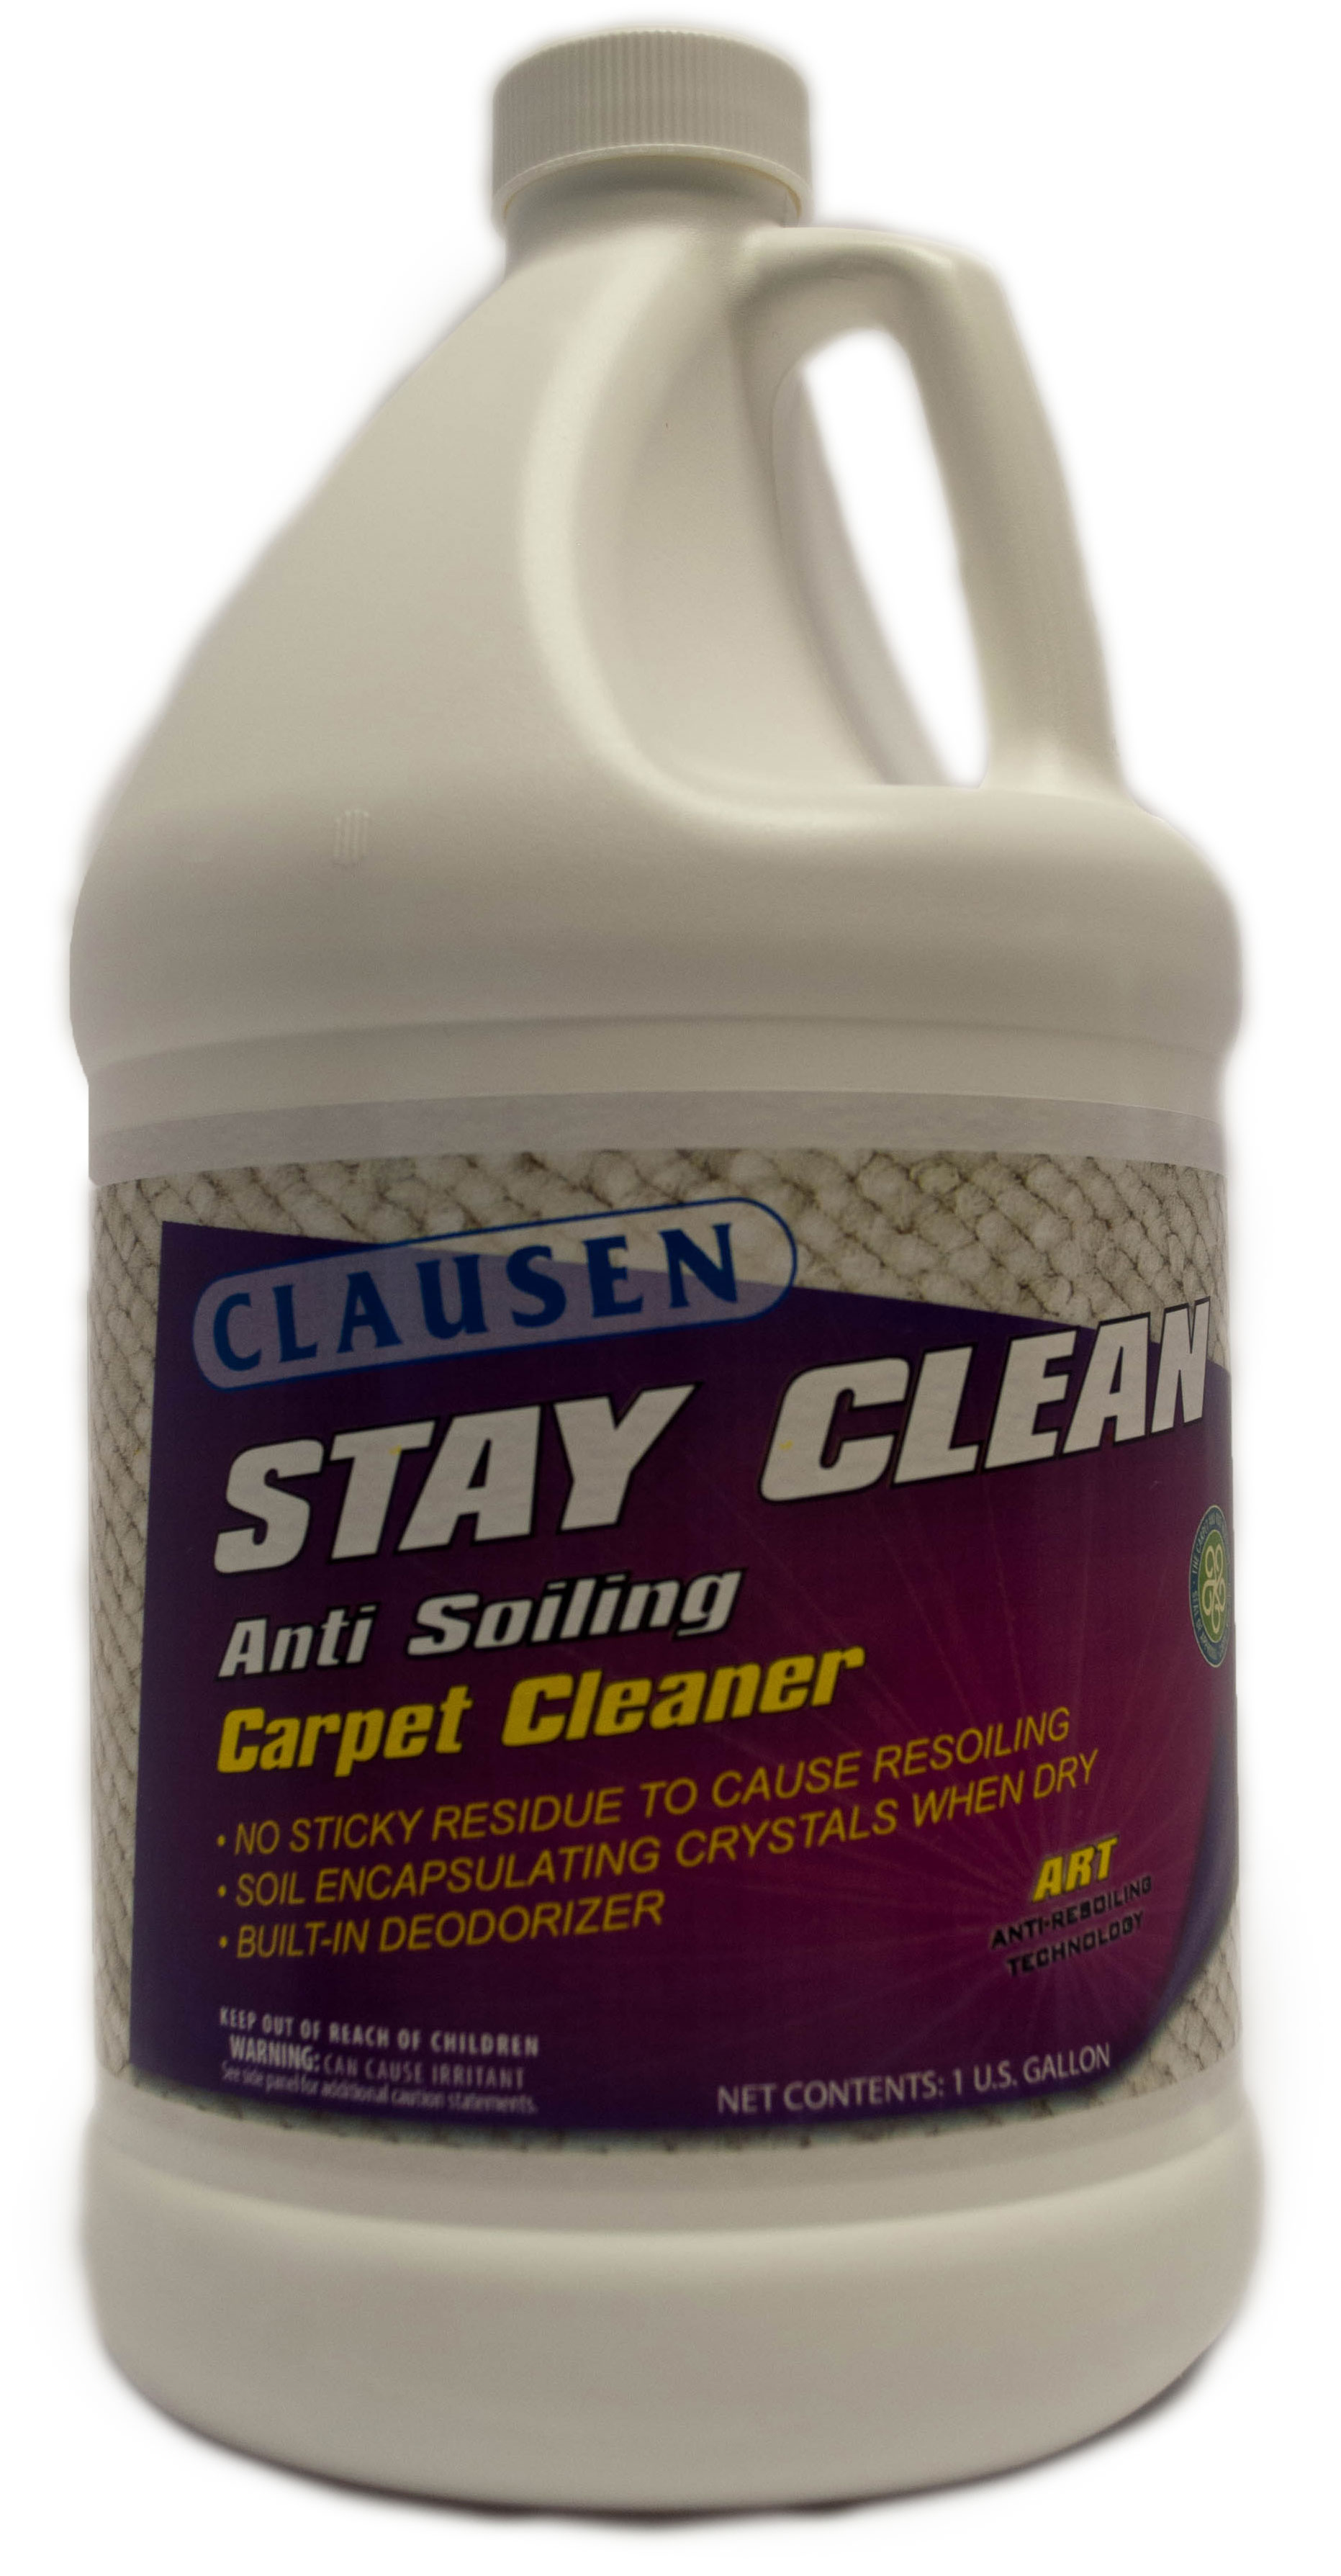 Stay Clean Anti Soiling Carpet Cleaner